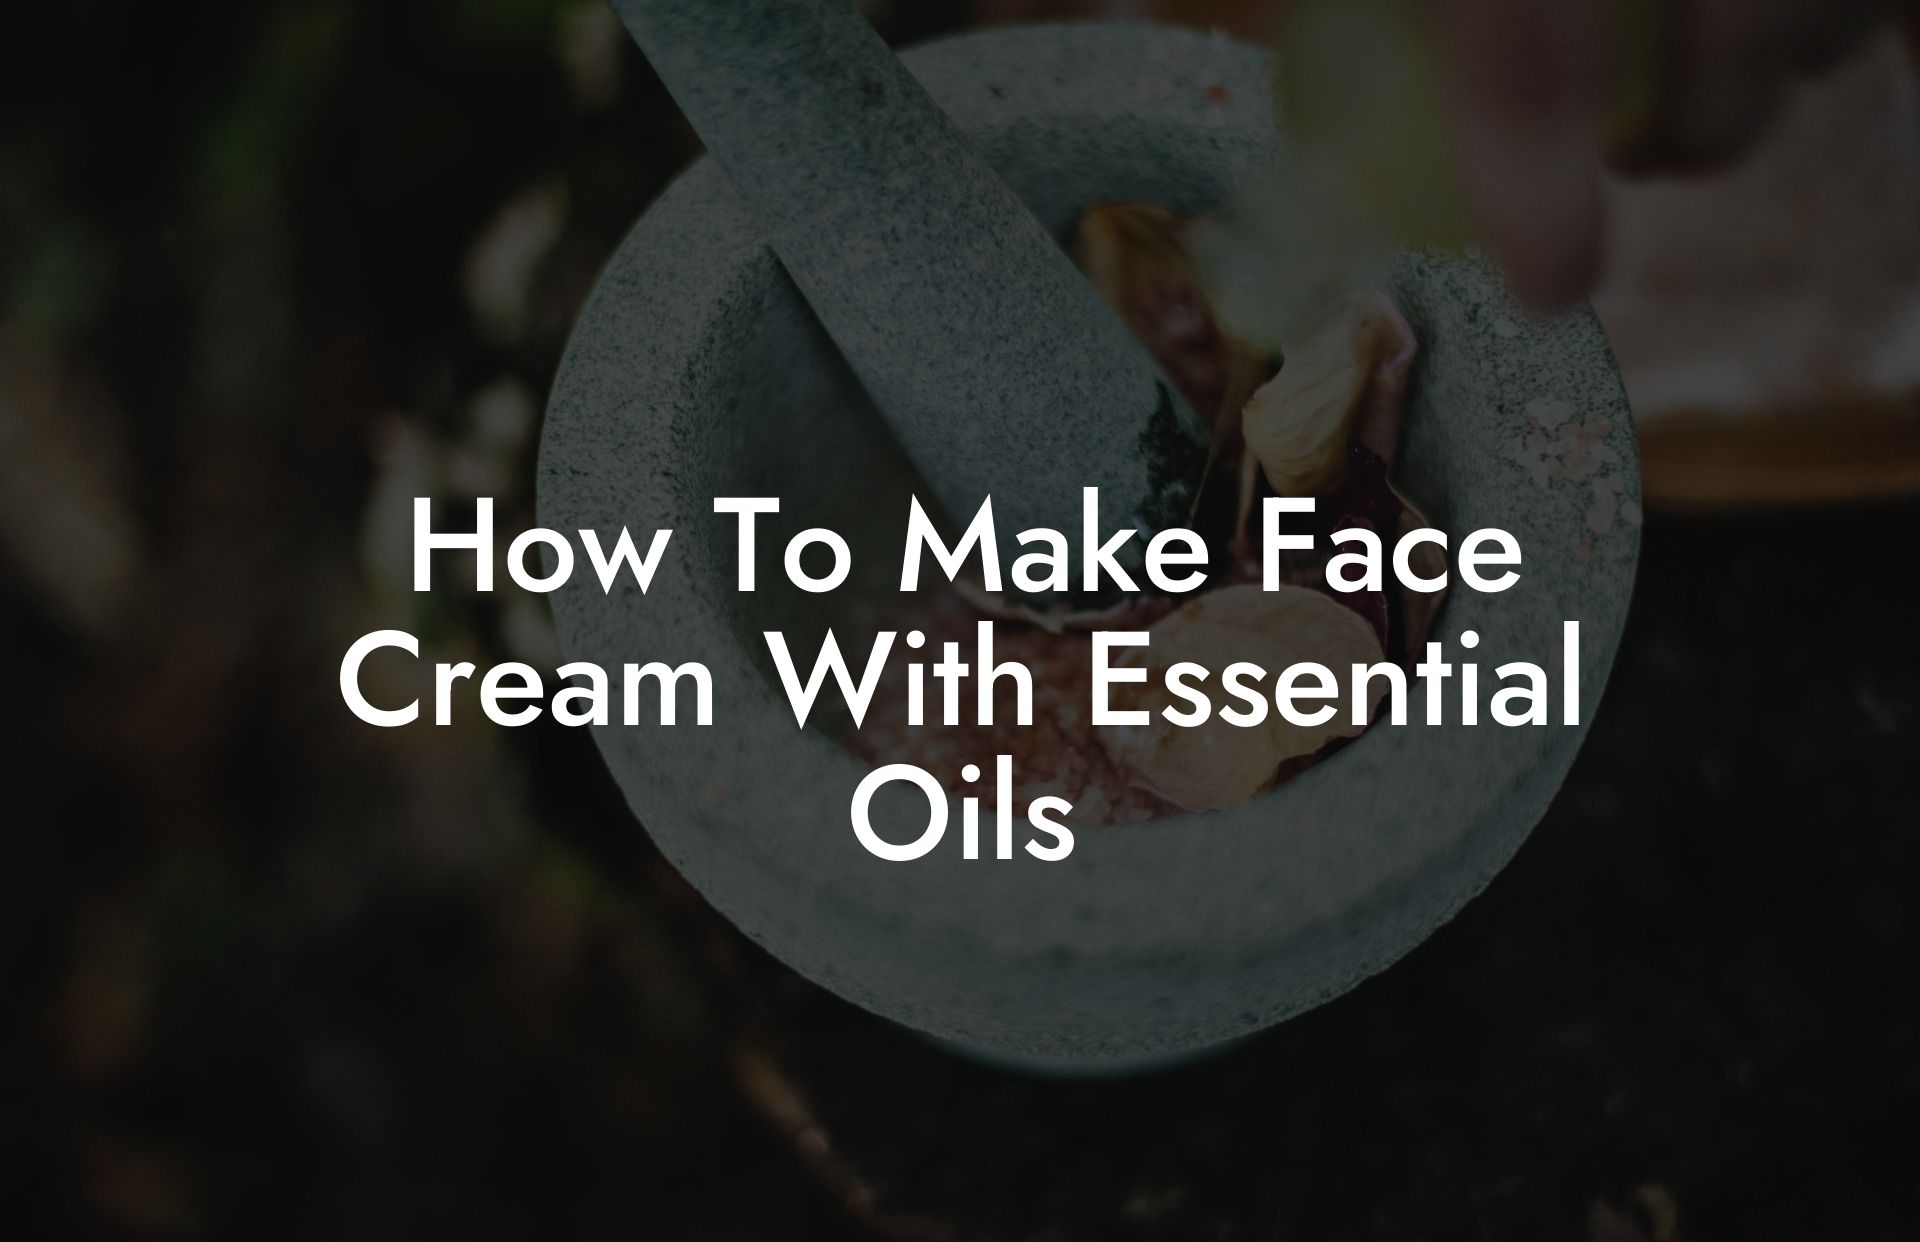 How To Make Face Cream With Essential Oils